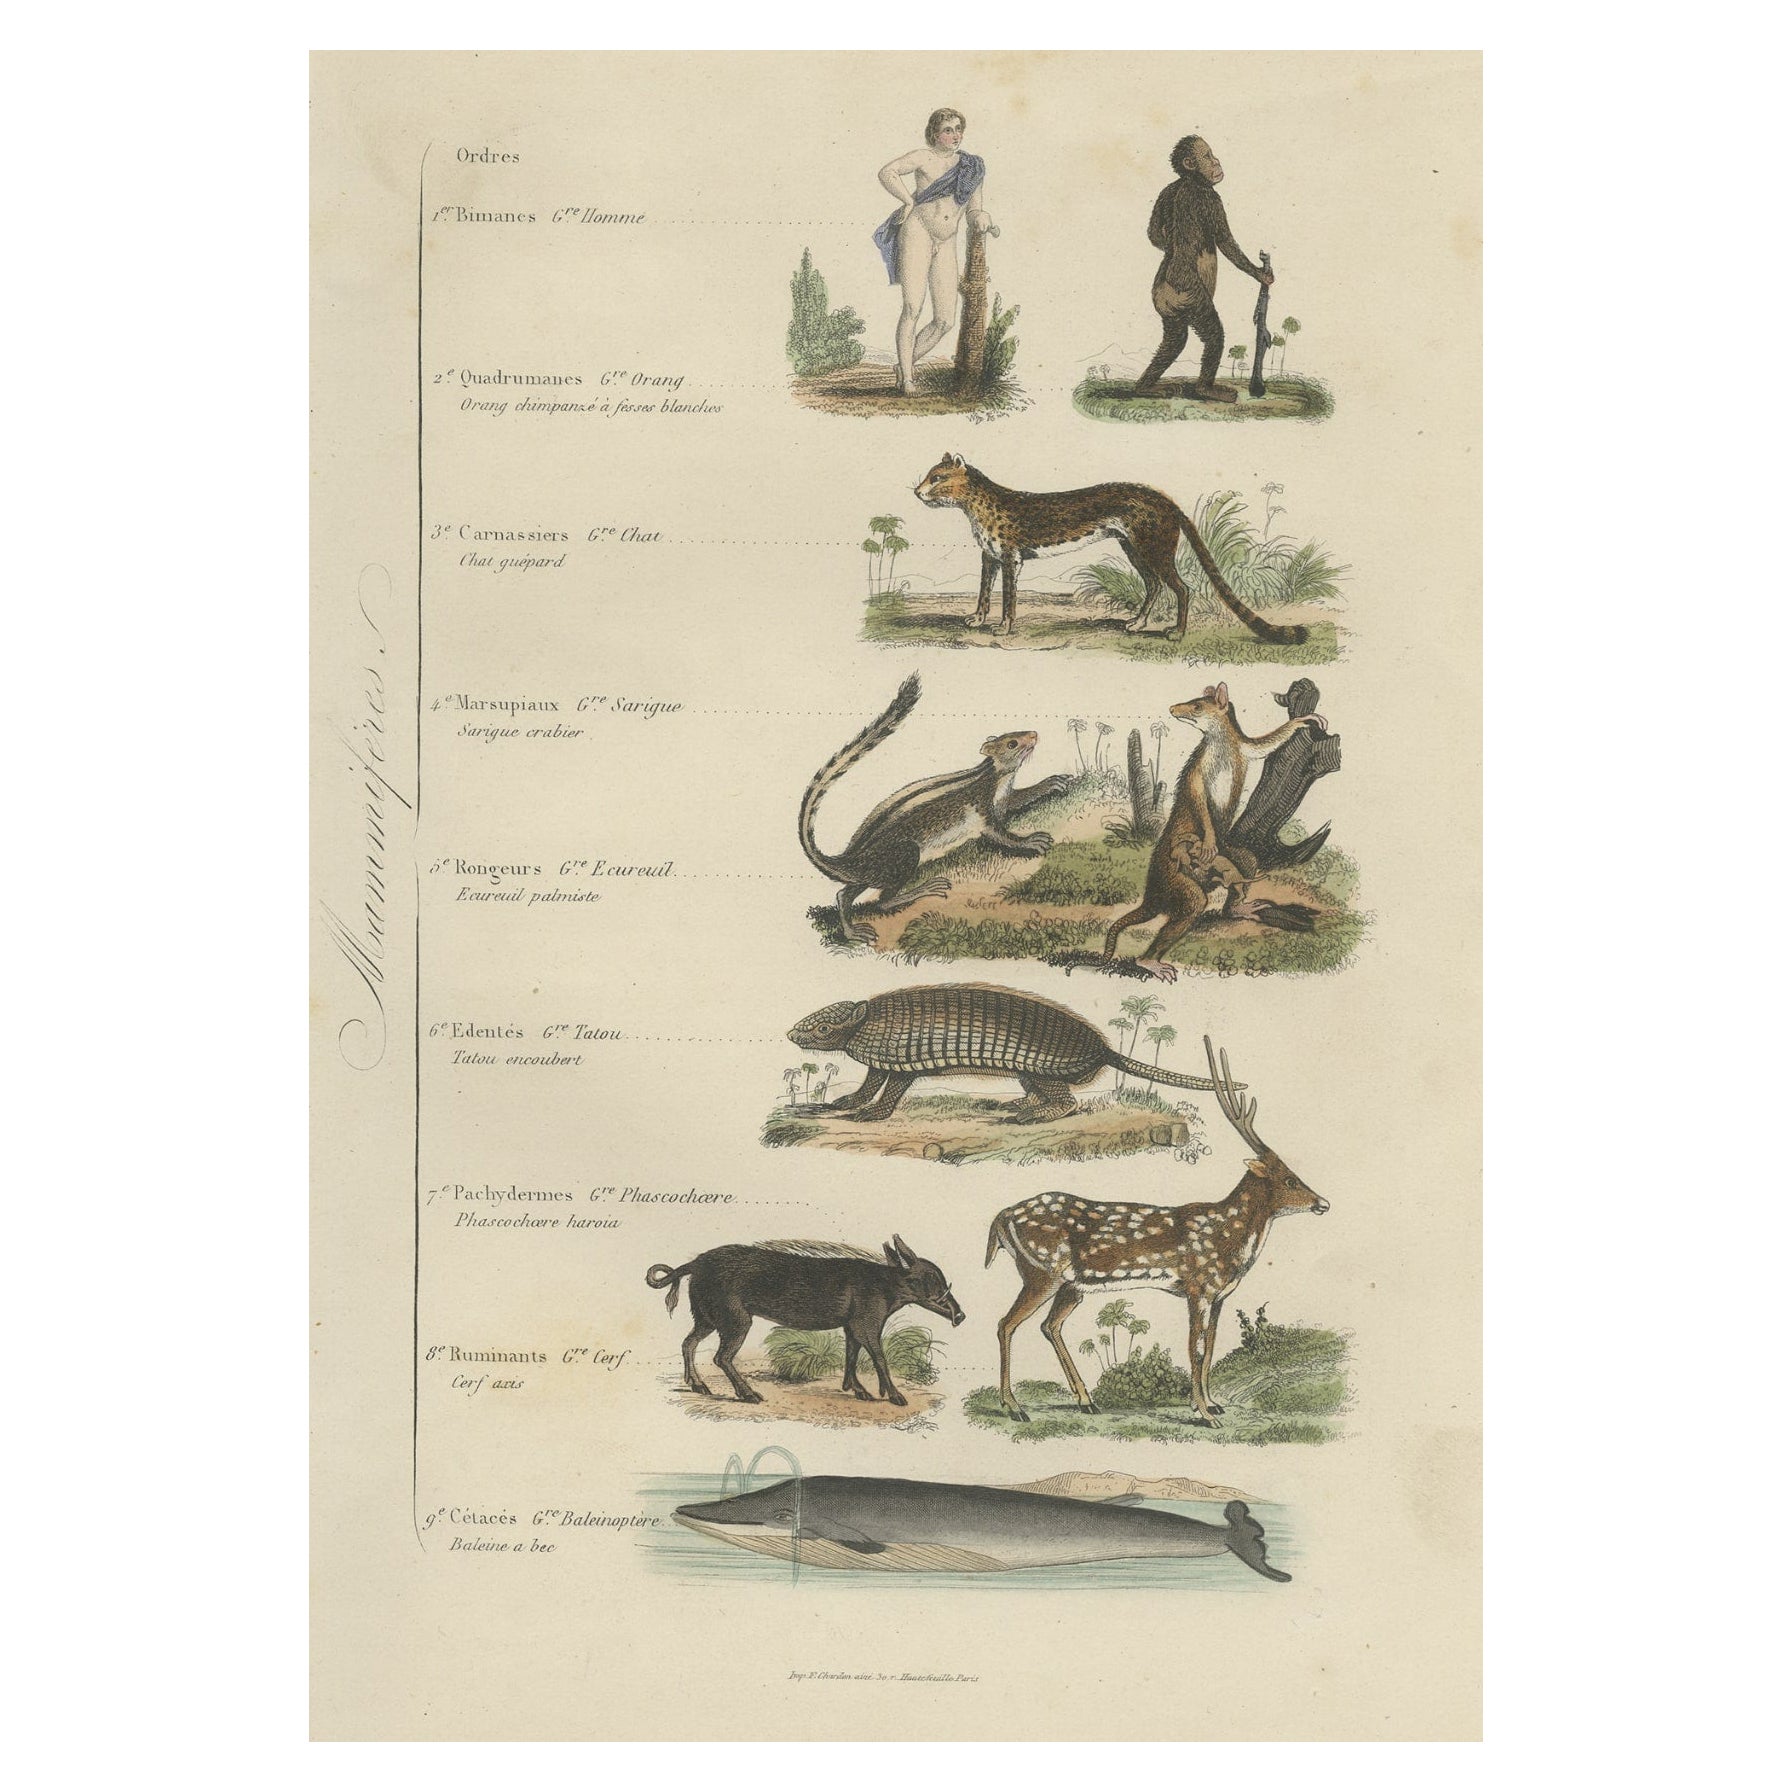 Interesting and Decorative Antique Print of Various Mammals and Humans, 1854